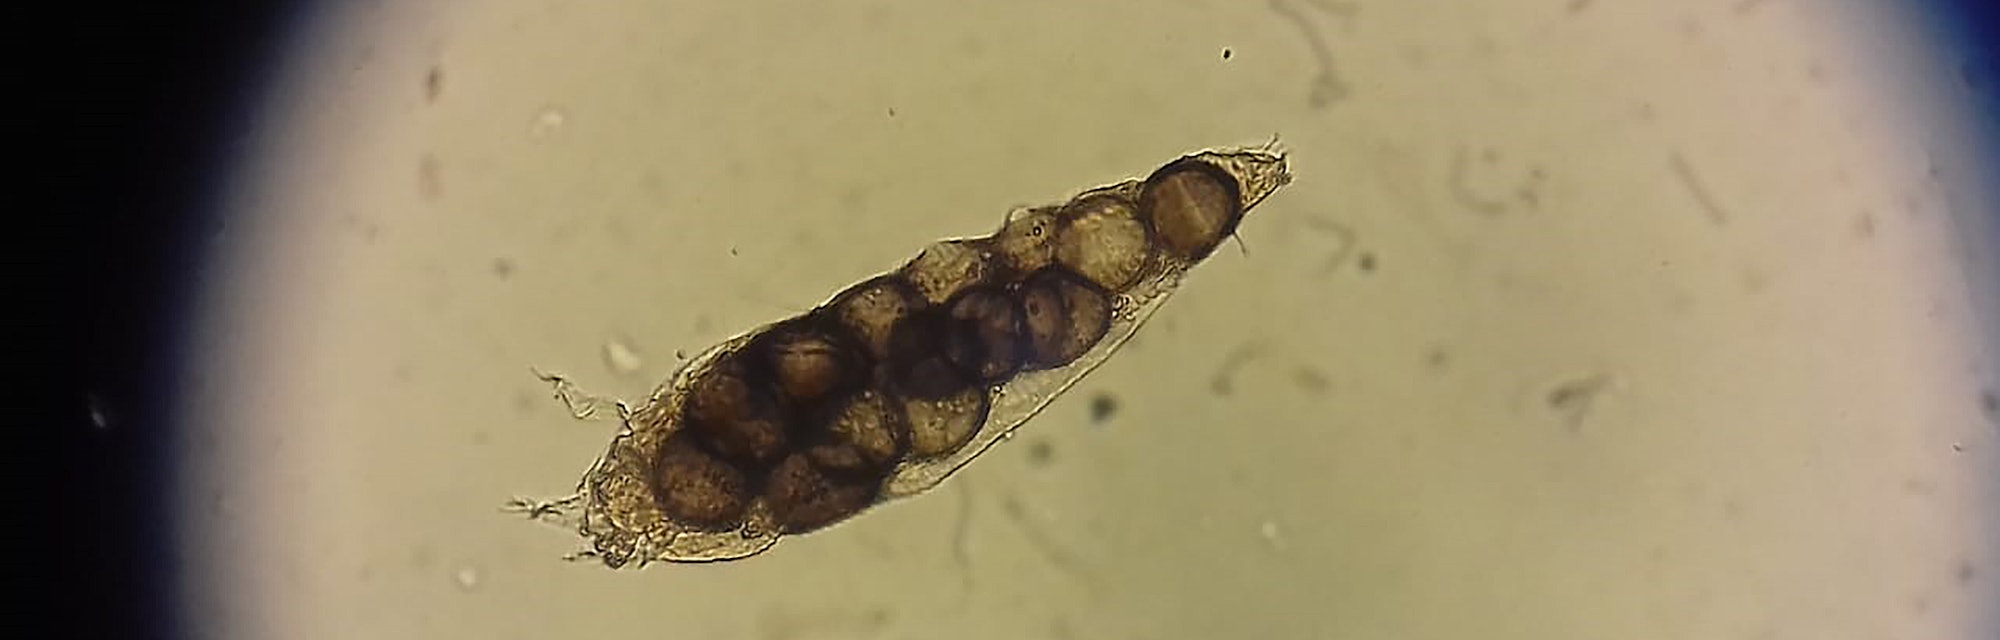 Demodex parasite under skin in dog or people take photo from microscope